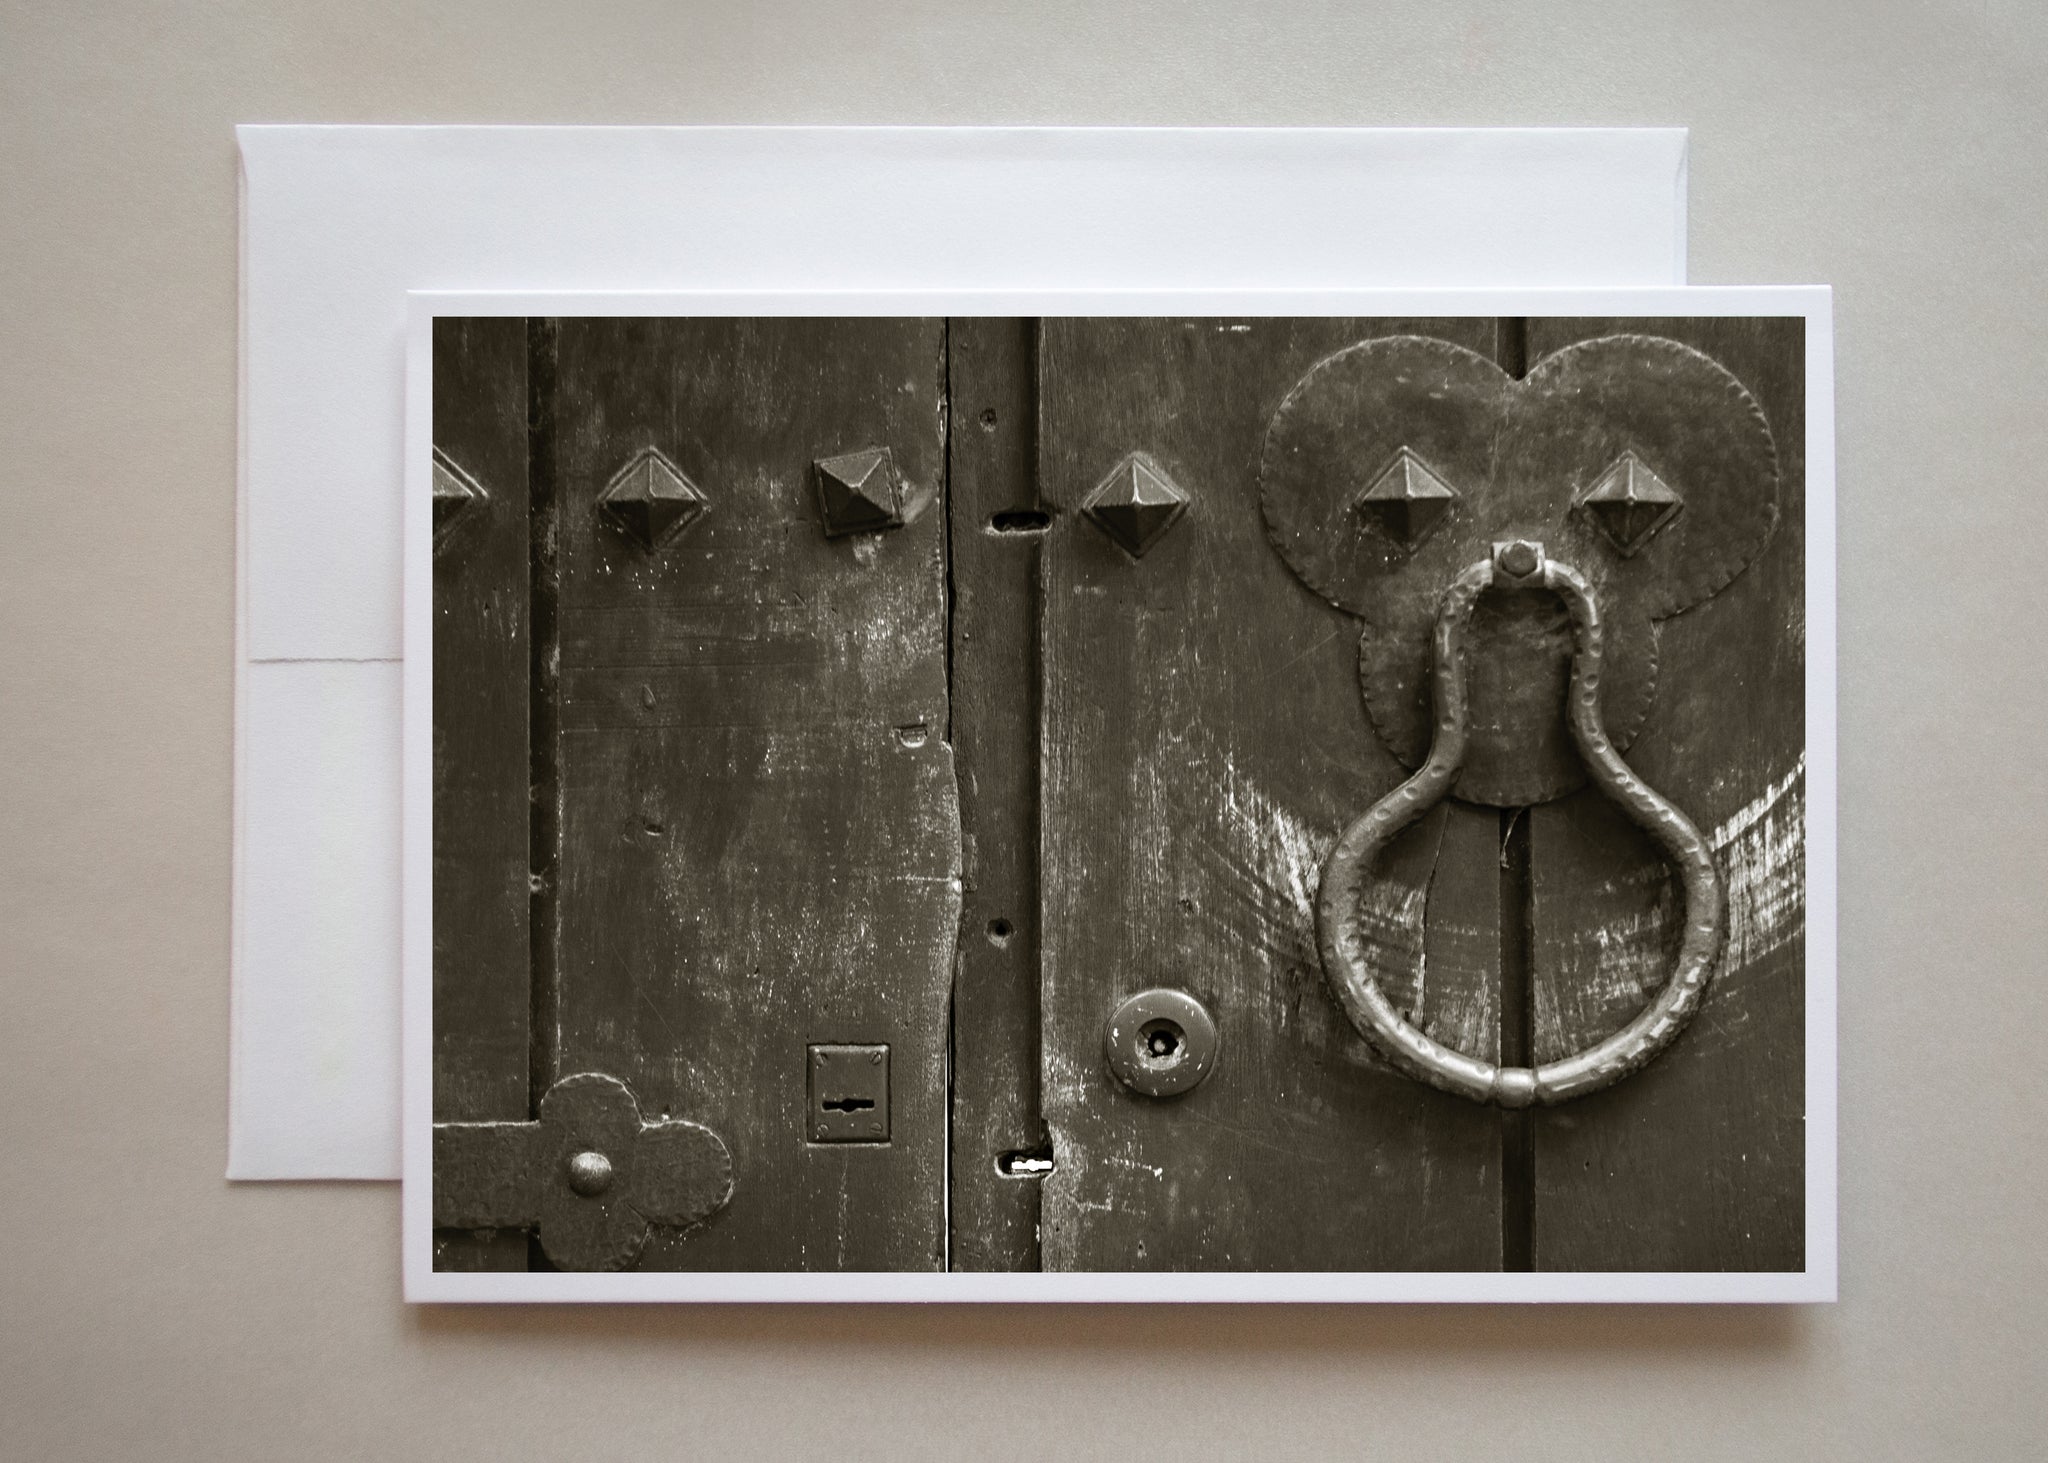 A sepia-toned black and white photograph of a metal door knocker with swing marks against the wooden door photographed in Buenos Aires by Caley Taylor.